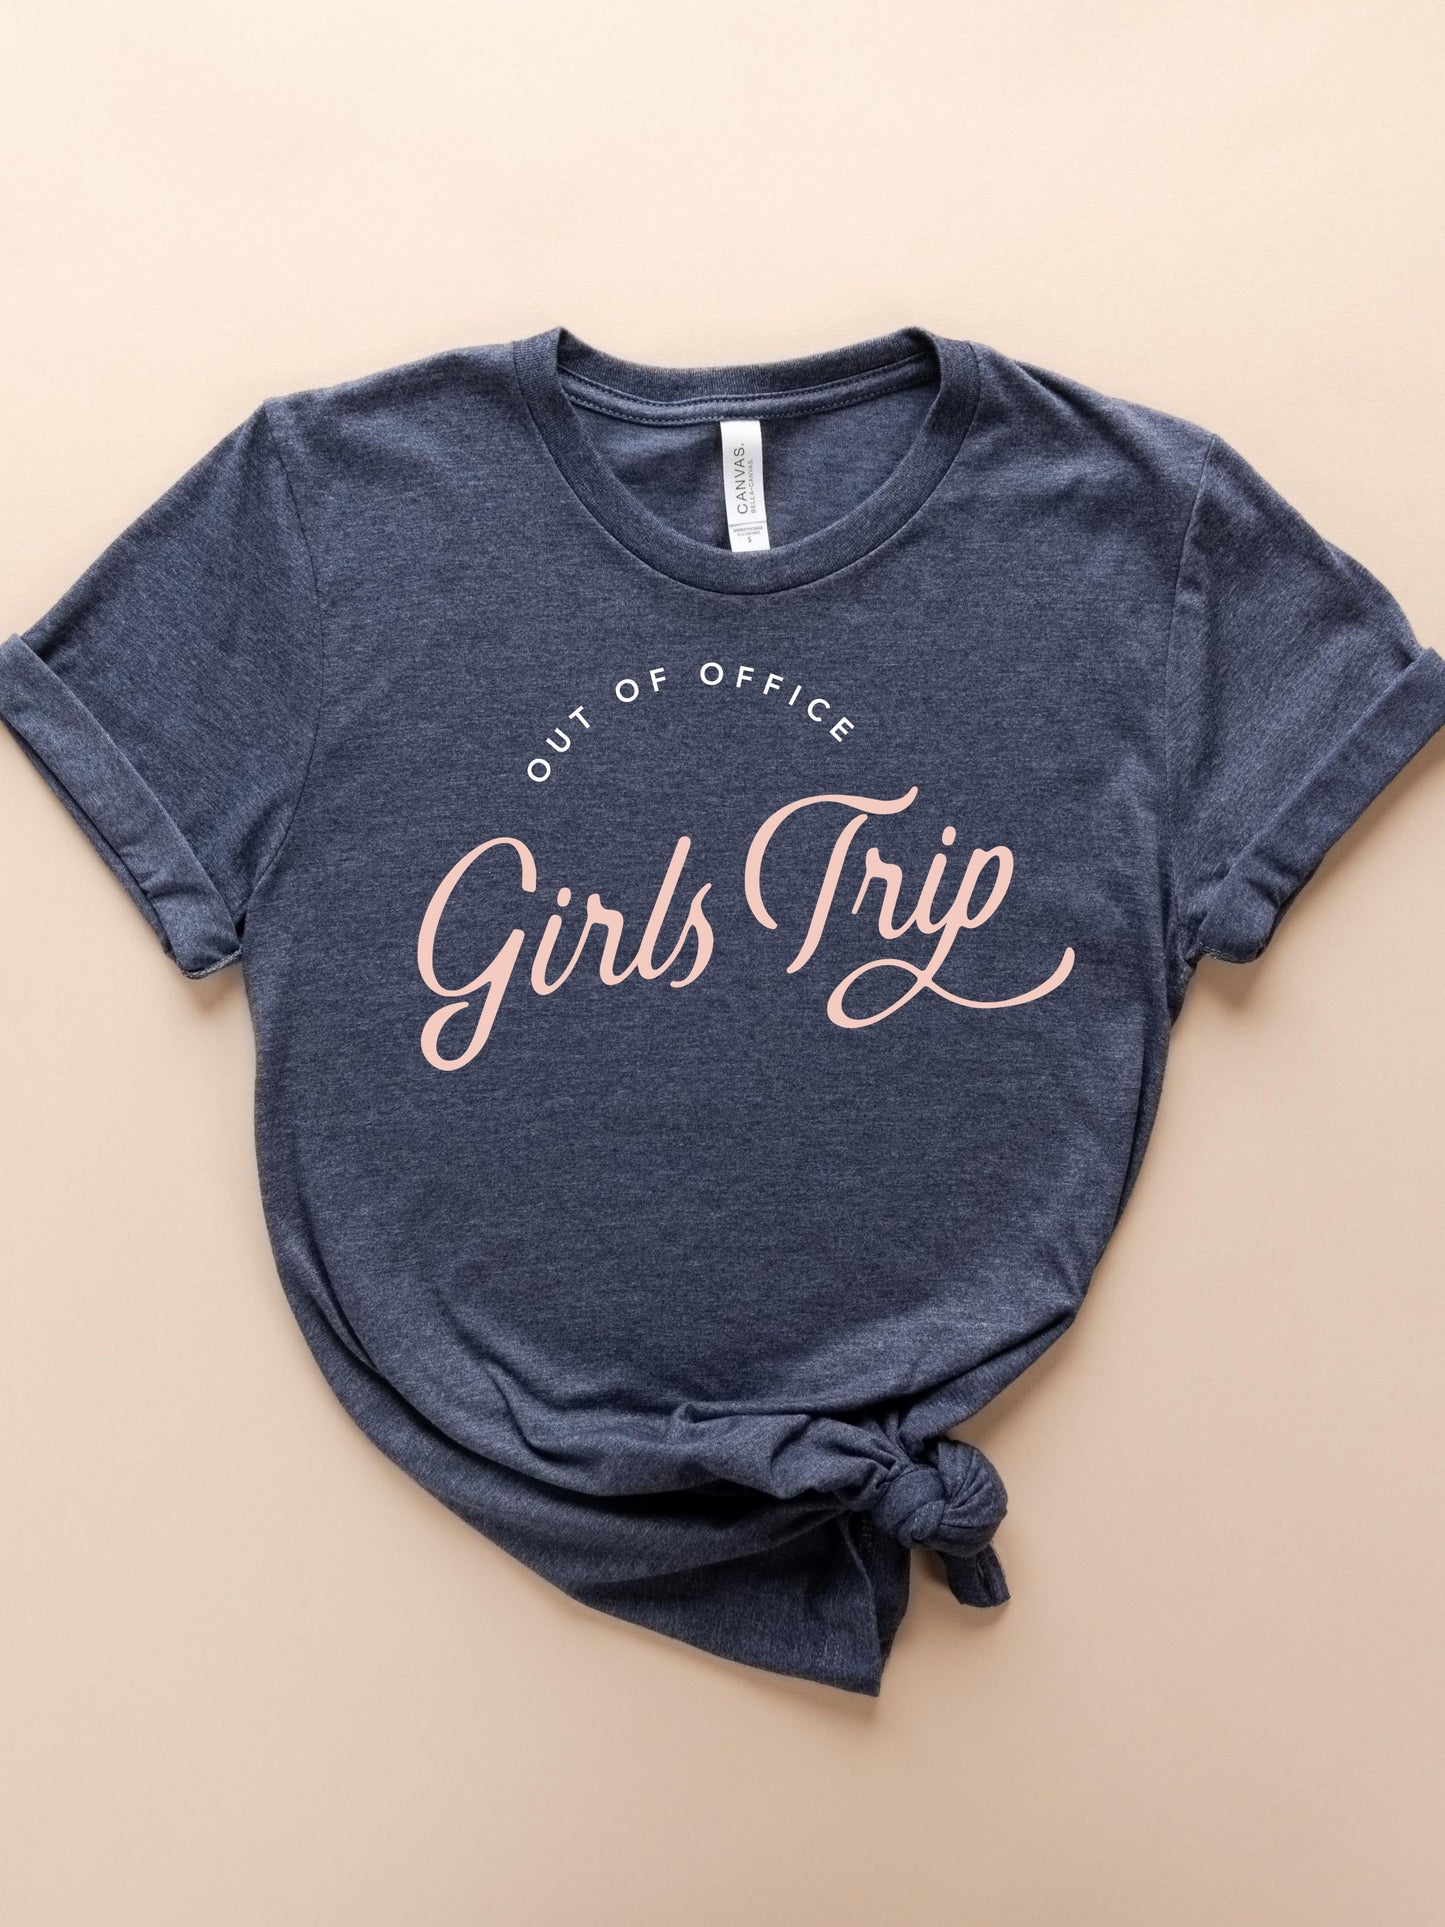 Out of Office Girls Trip Shirt